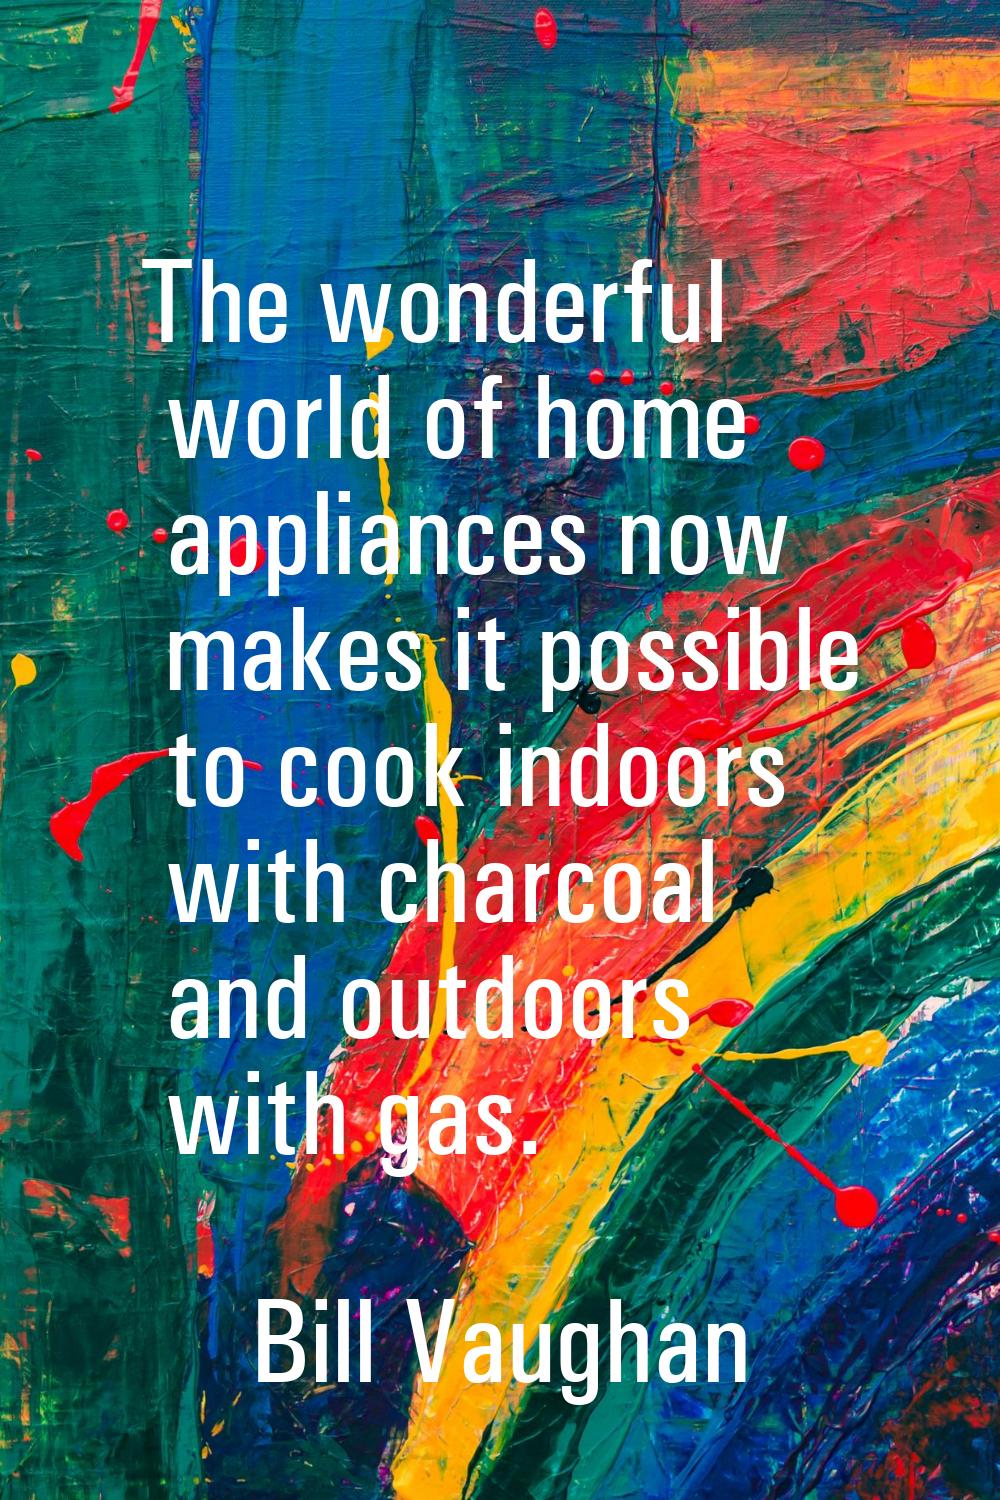 The wonderful world of home appliances now makes it possible to cook indoors with charcoal and outd